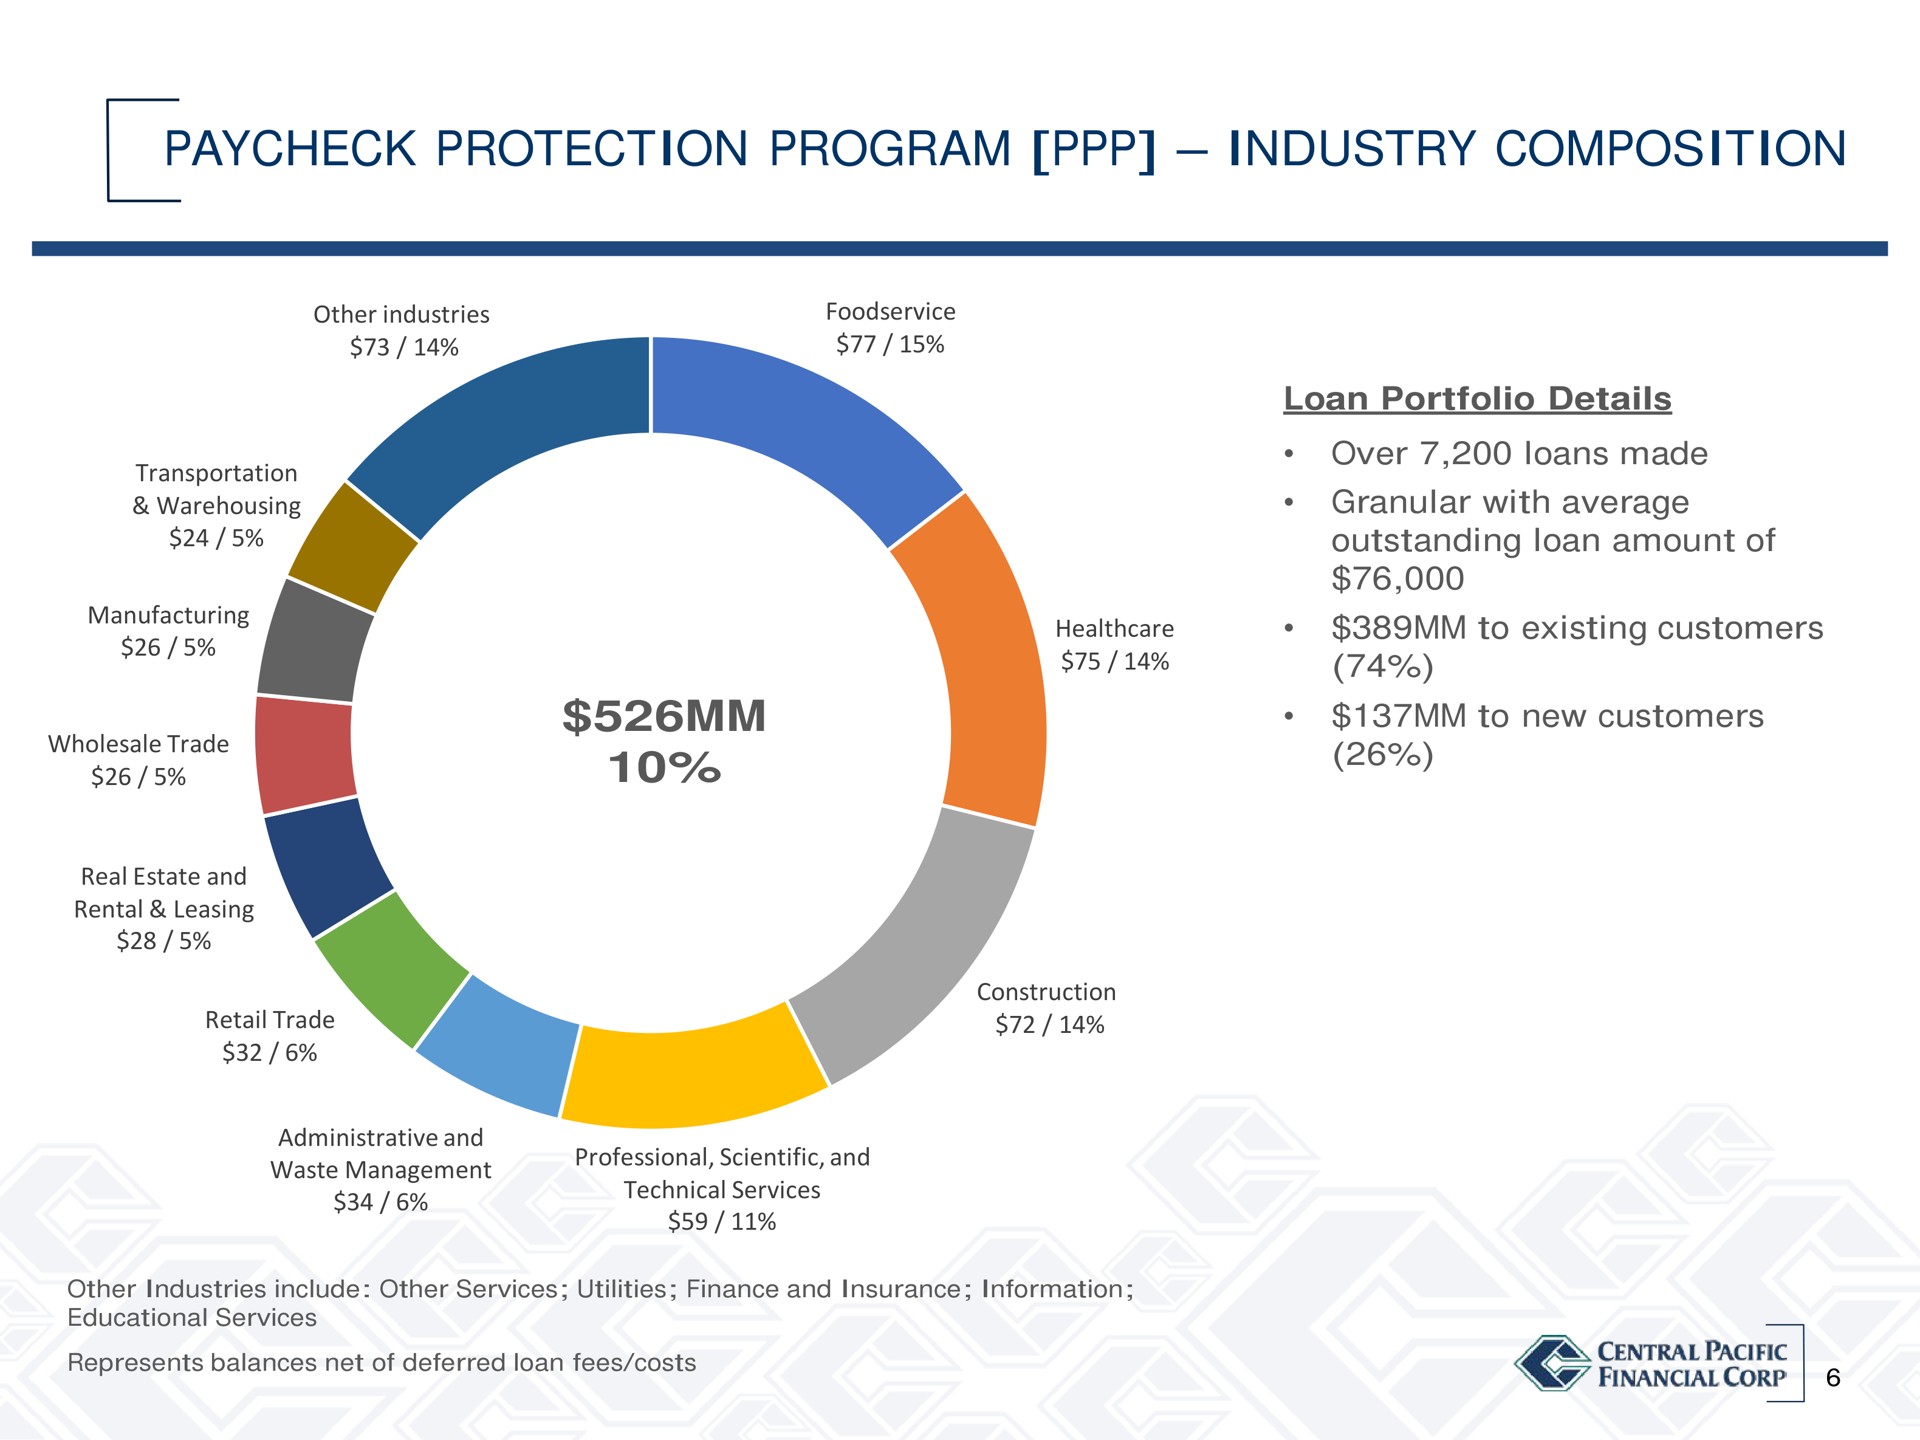 protection program industry composition to existing customers | Central Pacific Financial